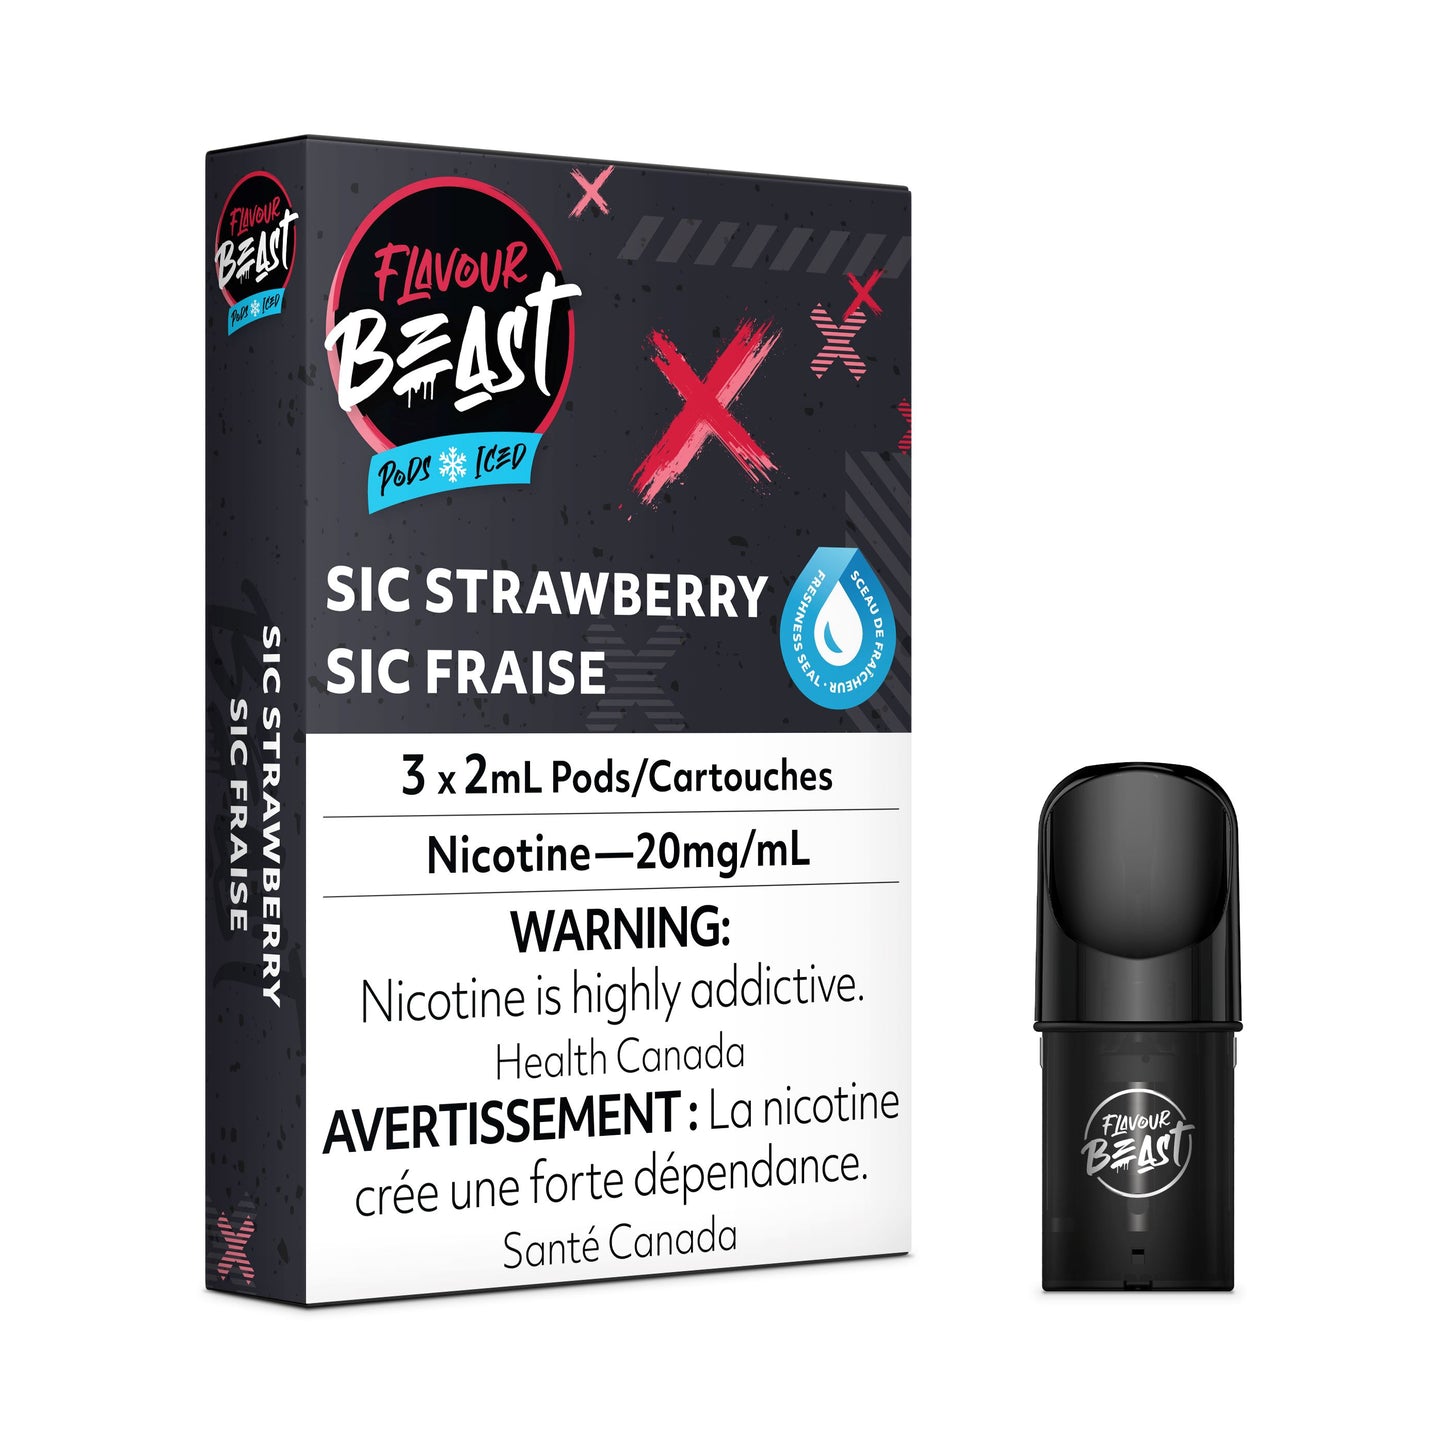 Sic Strawberry Iced - FB CLOSED PODS Flavour Beast Flow 